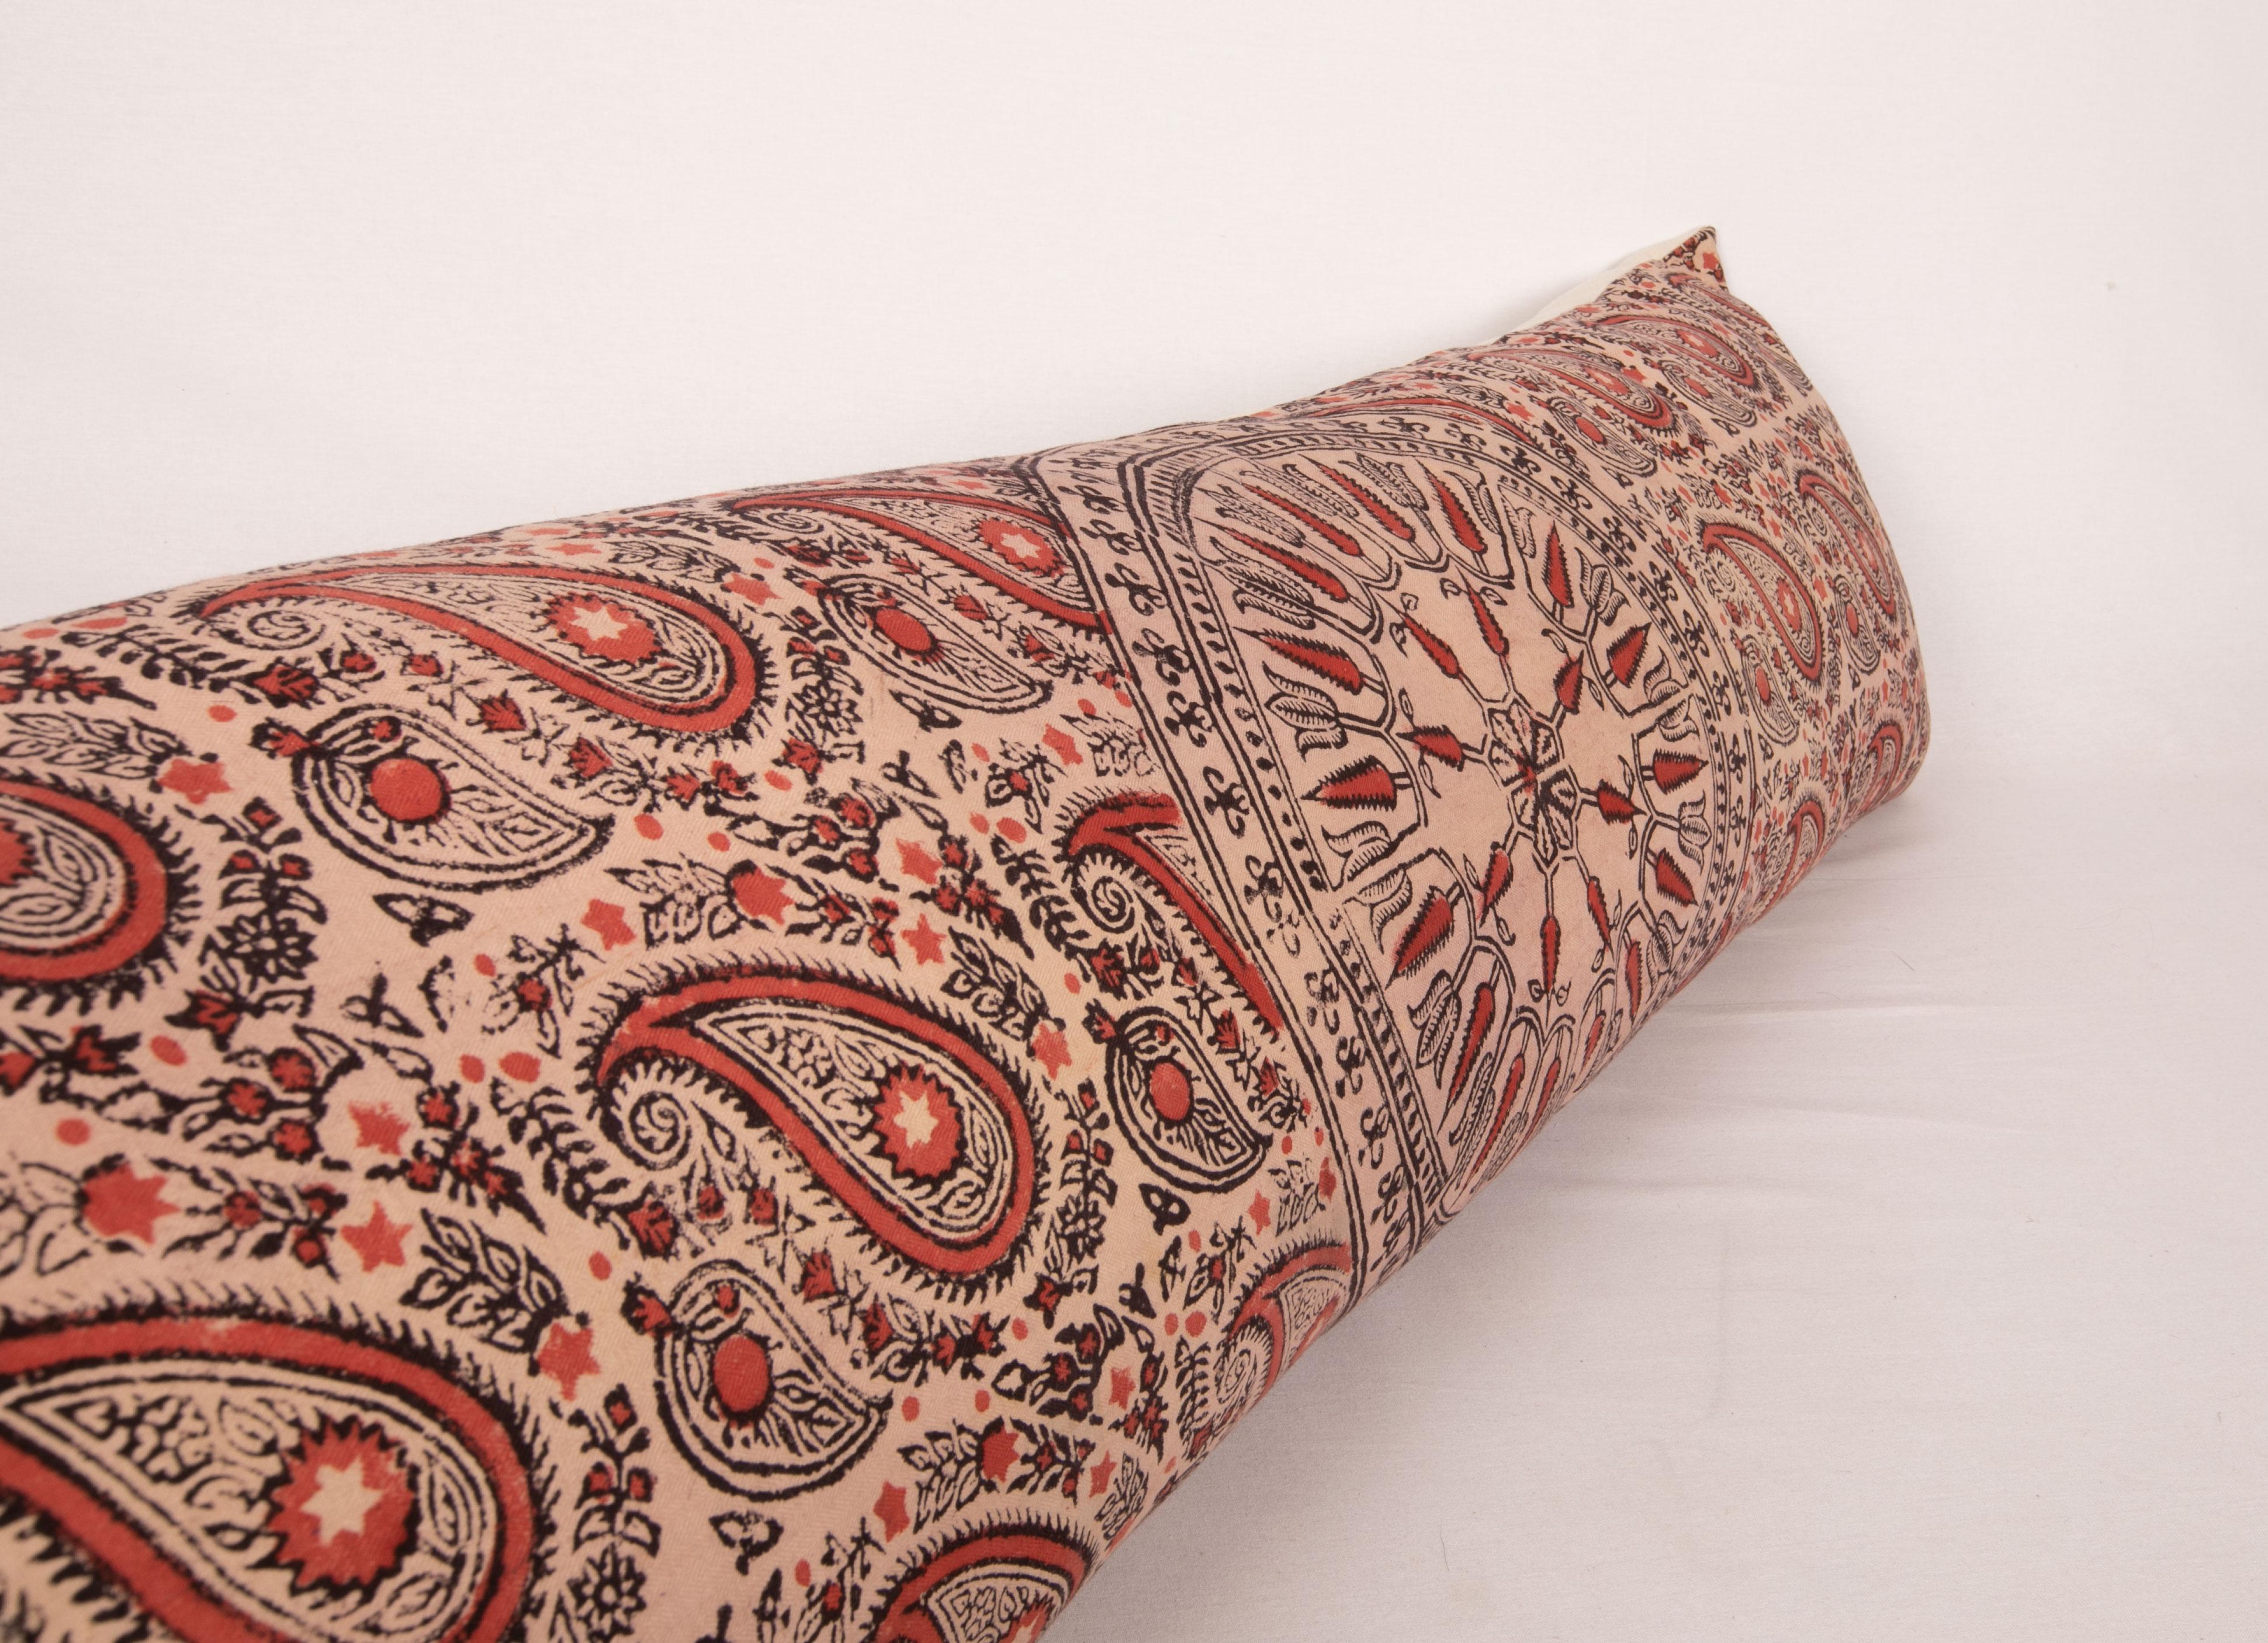 Body Pillow Case Made from an Uzbek Block Print, Early 20th C For Sale 2